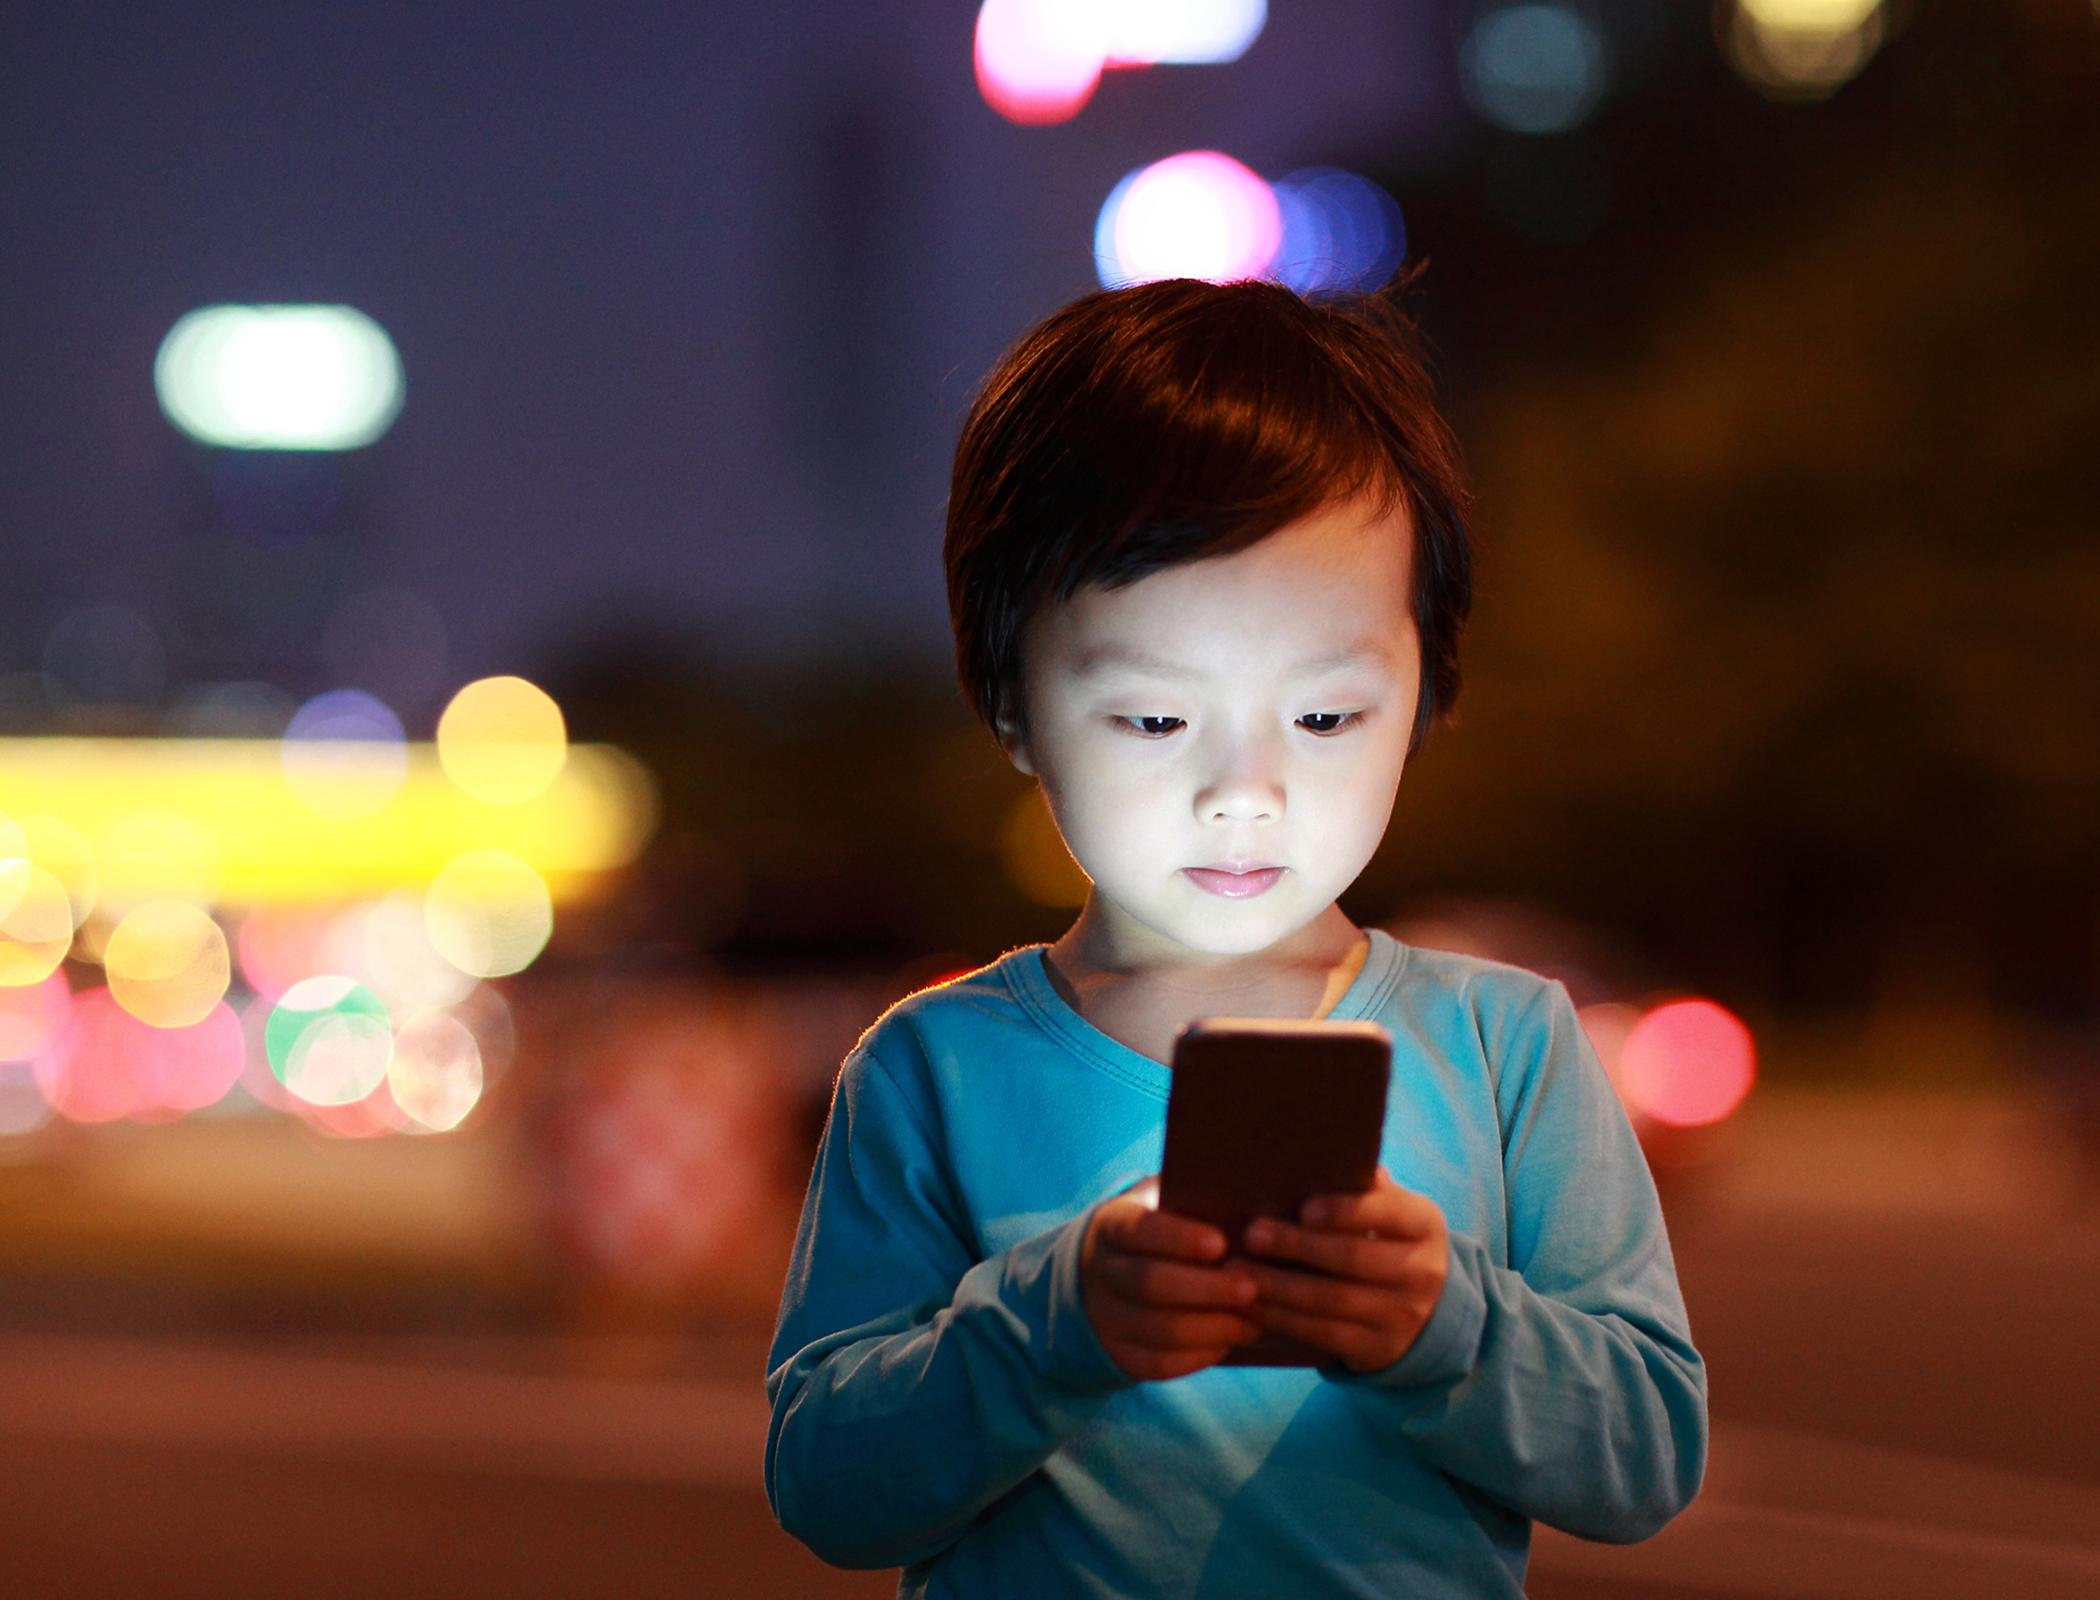 China proposes time limits on children’s smartphone use